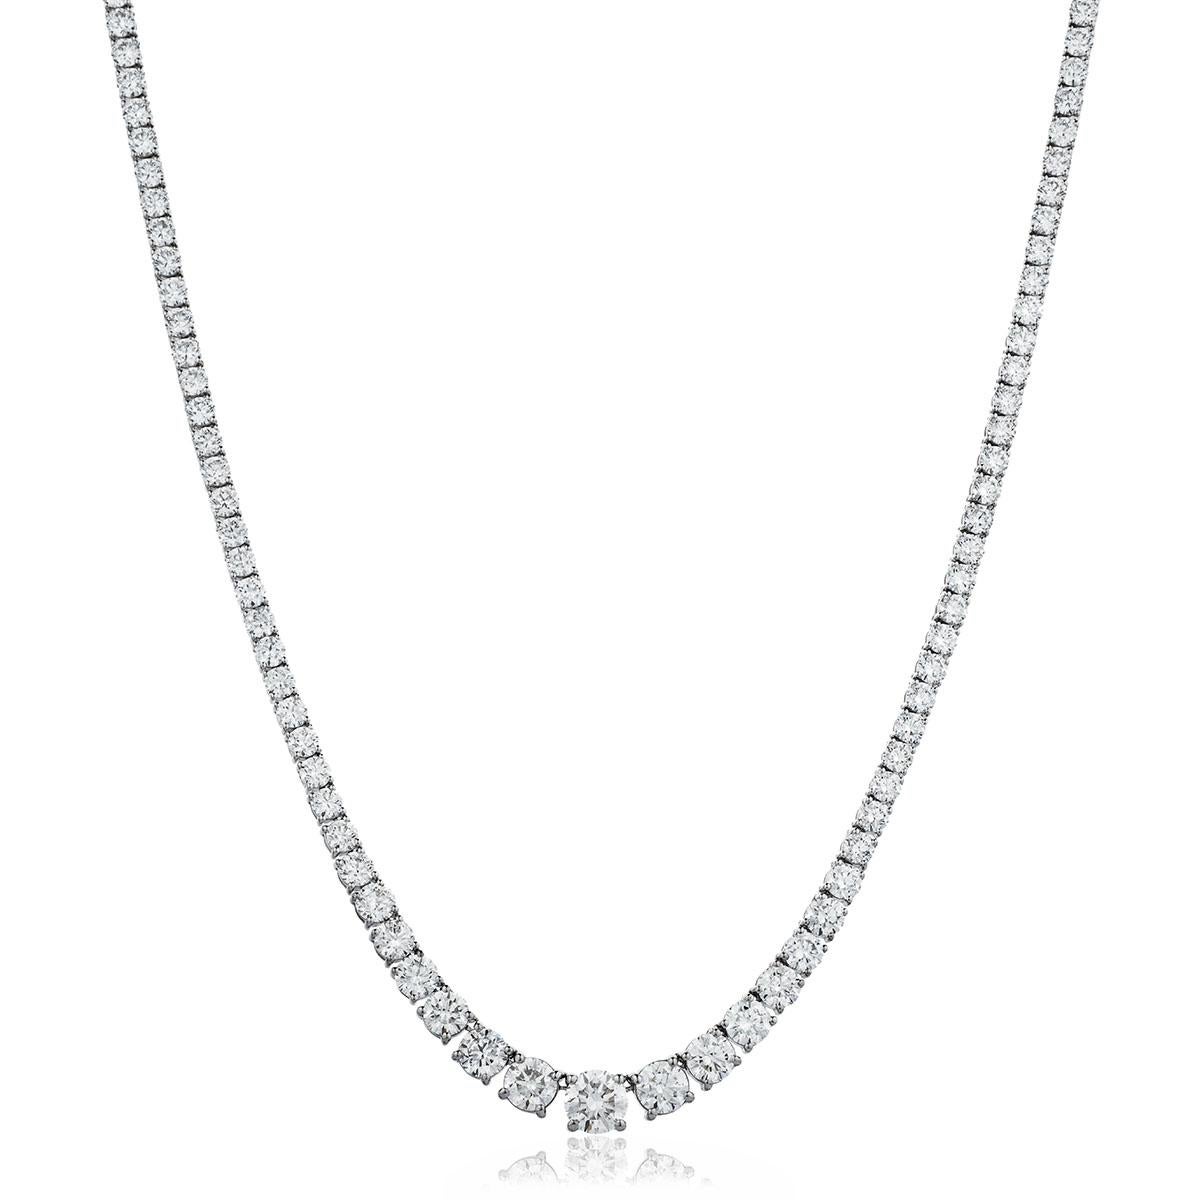 An impressive classic Riviera Tennis Necklace that features a substantial total Diamond weight of 7.17 Carats in beautifully graduated Round Brilliant Cut gems with a sparkly white color G clarity SI eye clean, the largest of which is 0.30 Carat.